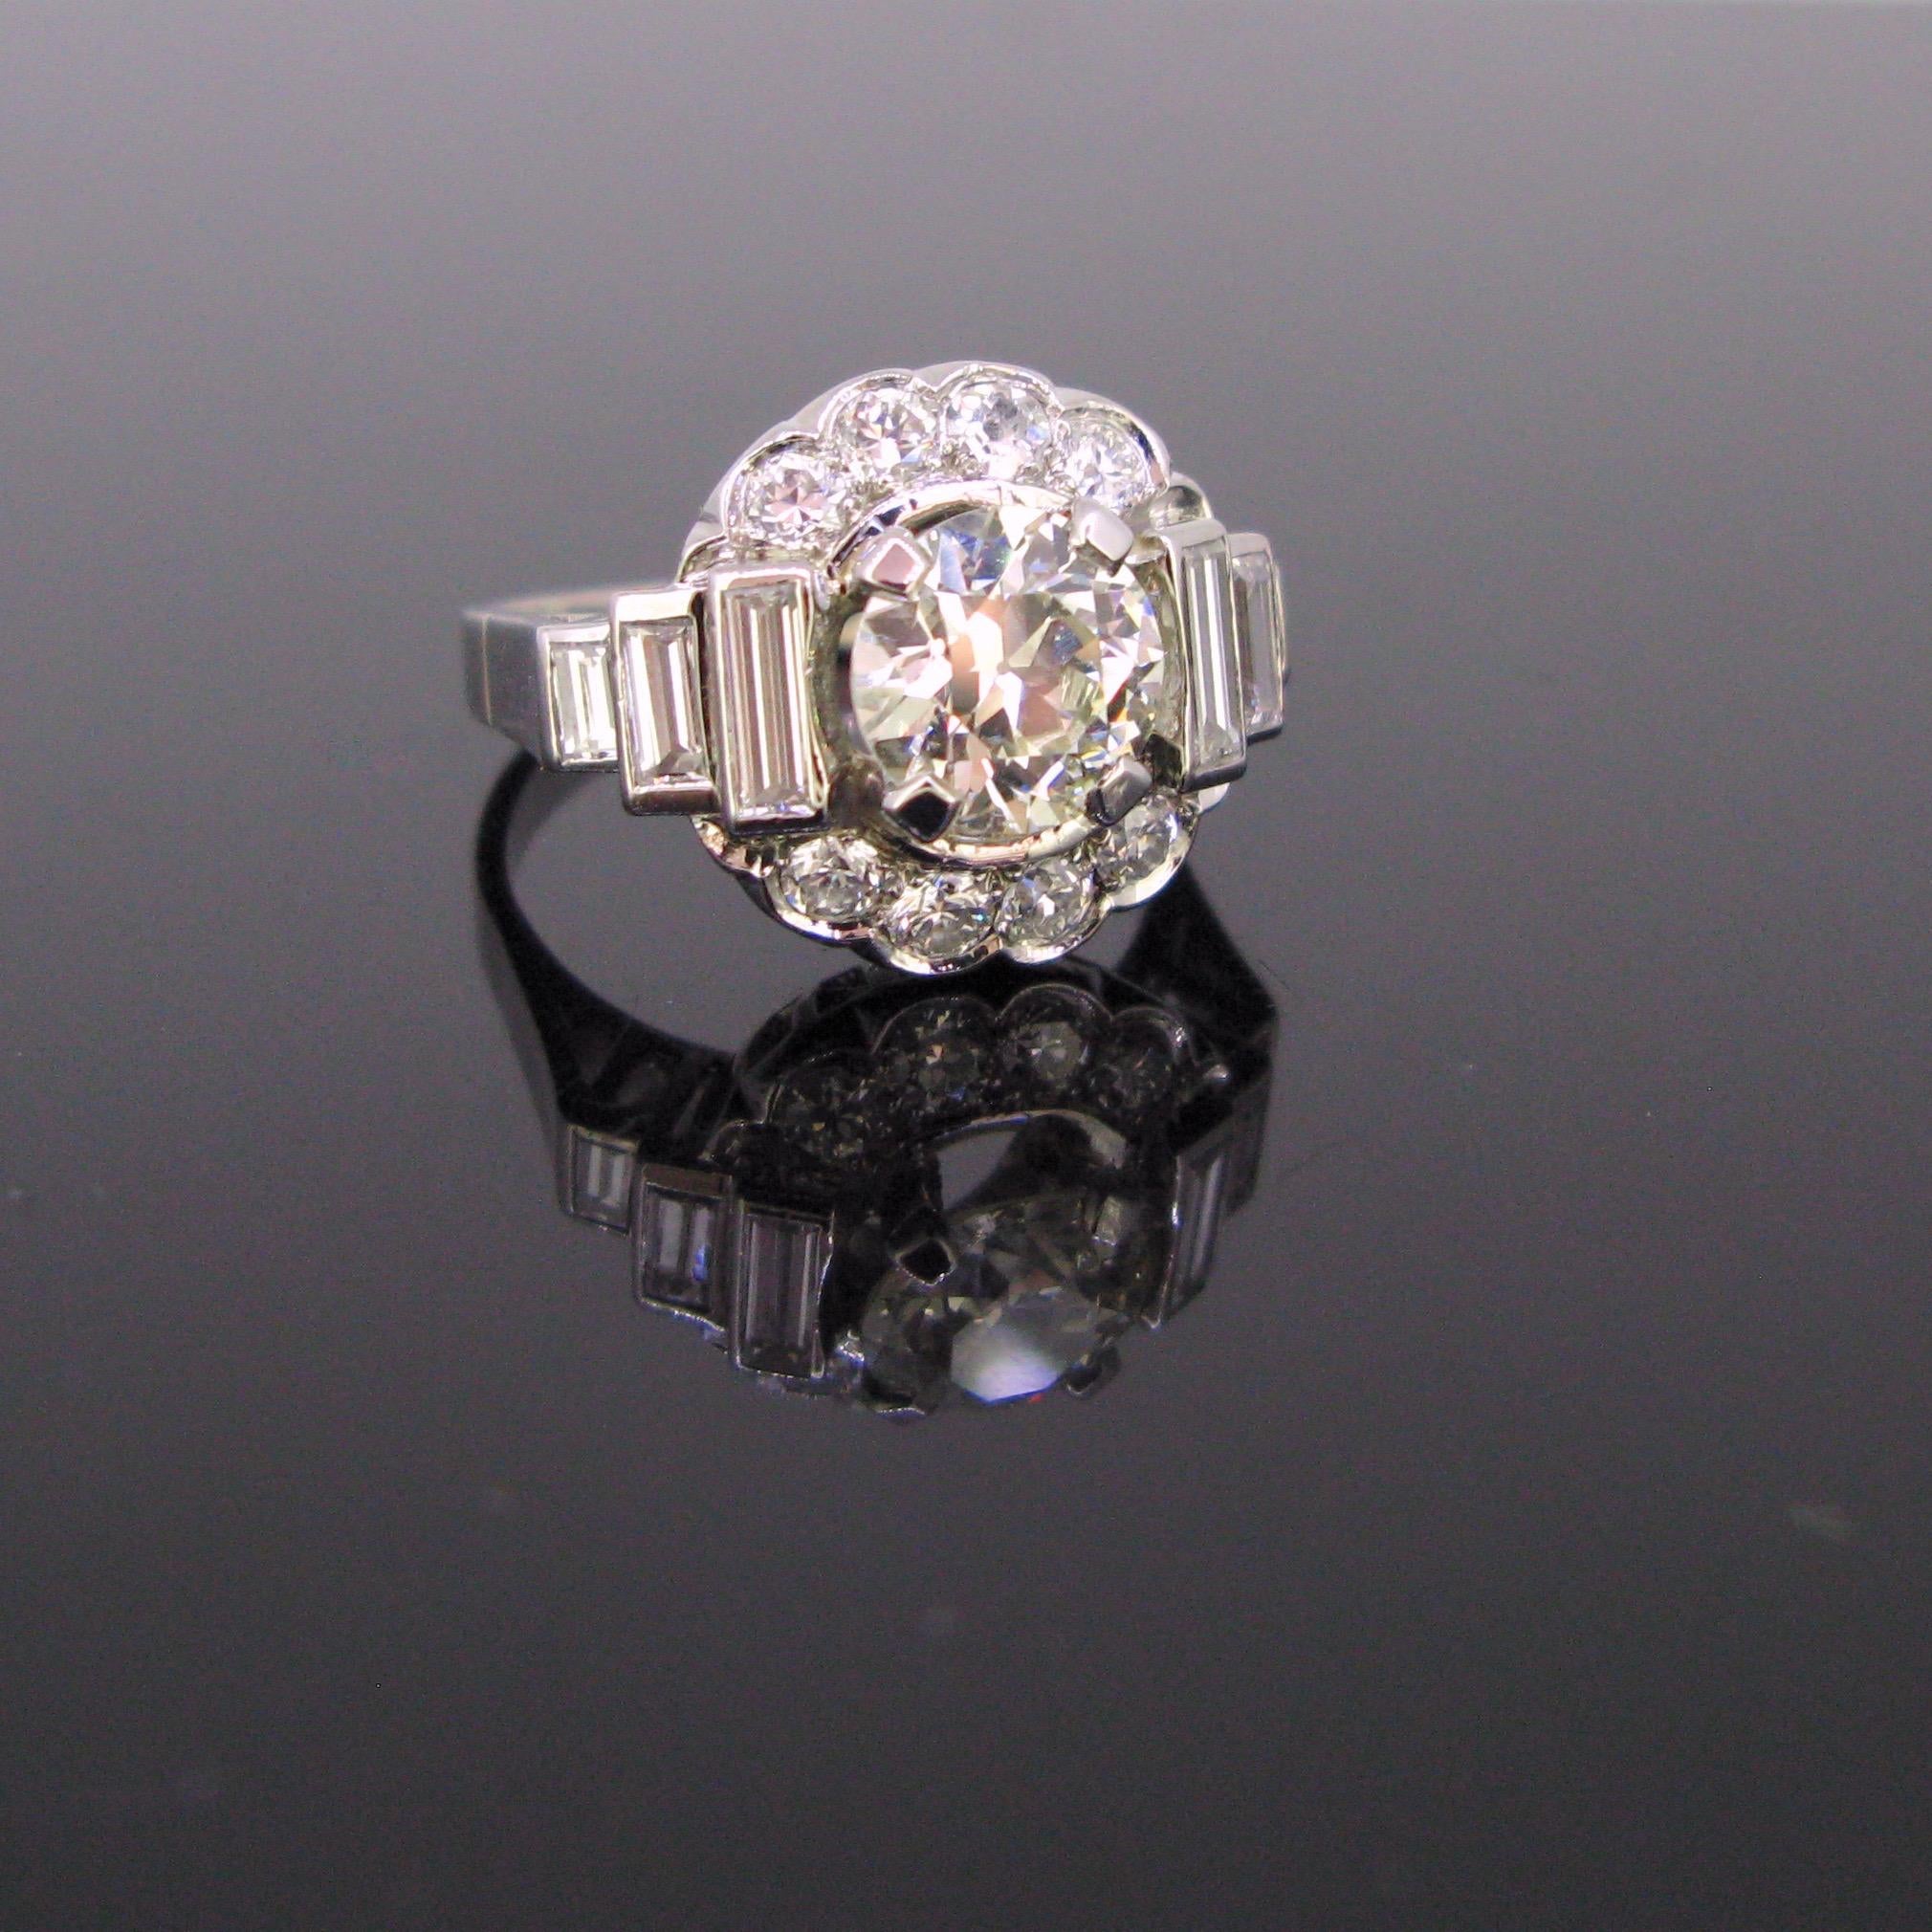  This beautiful Art Deco ring is made in platinum. It is set with a 2ct approximately transitional cut diamond surrounded with old European cut diamonds and shouldered on the sides with baguette diamonds. The total diamond carat weight is about